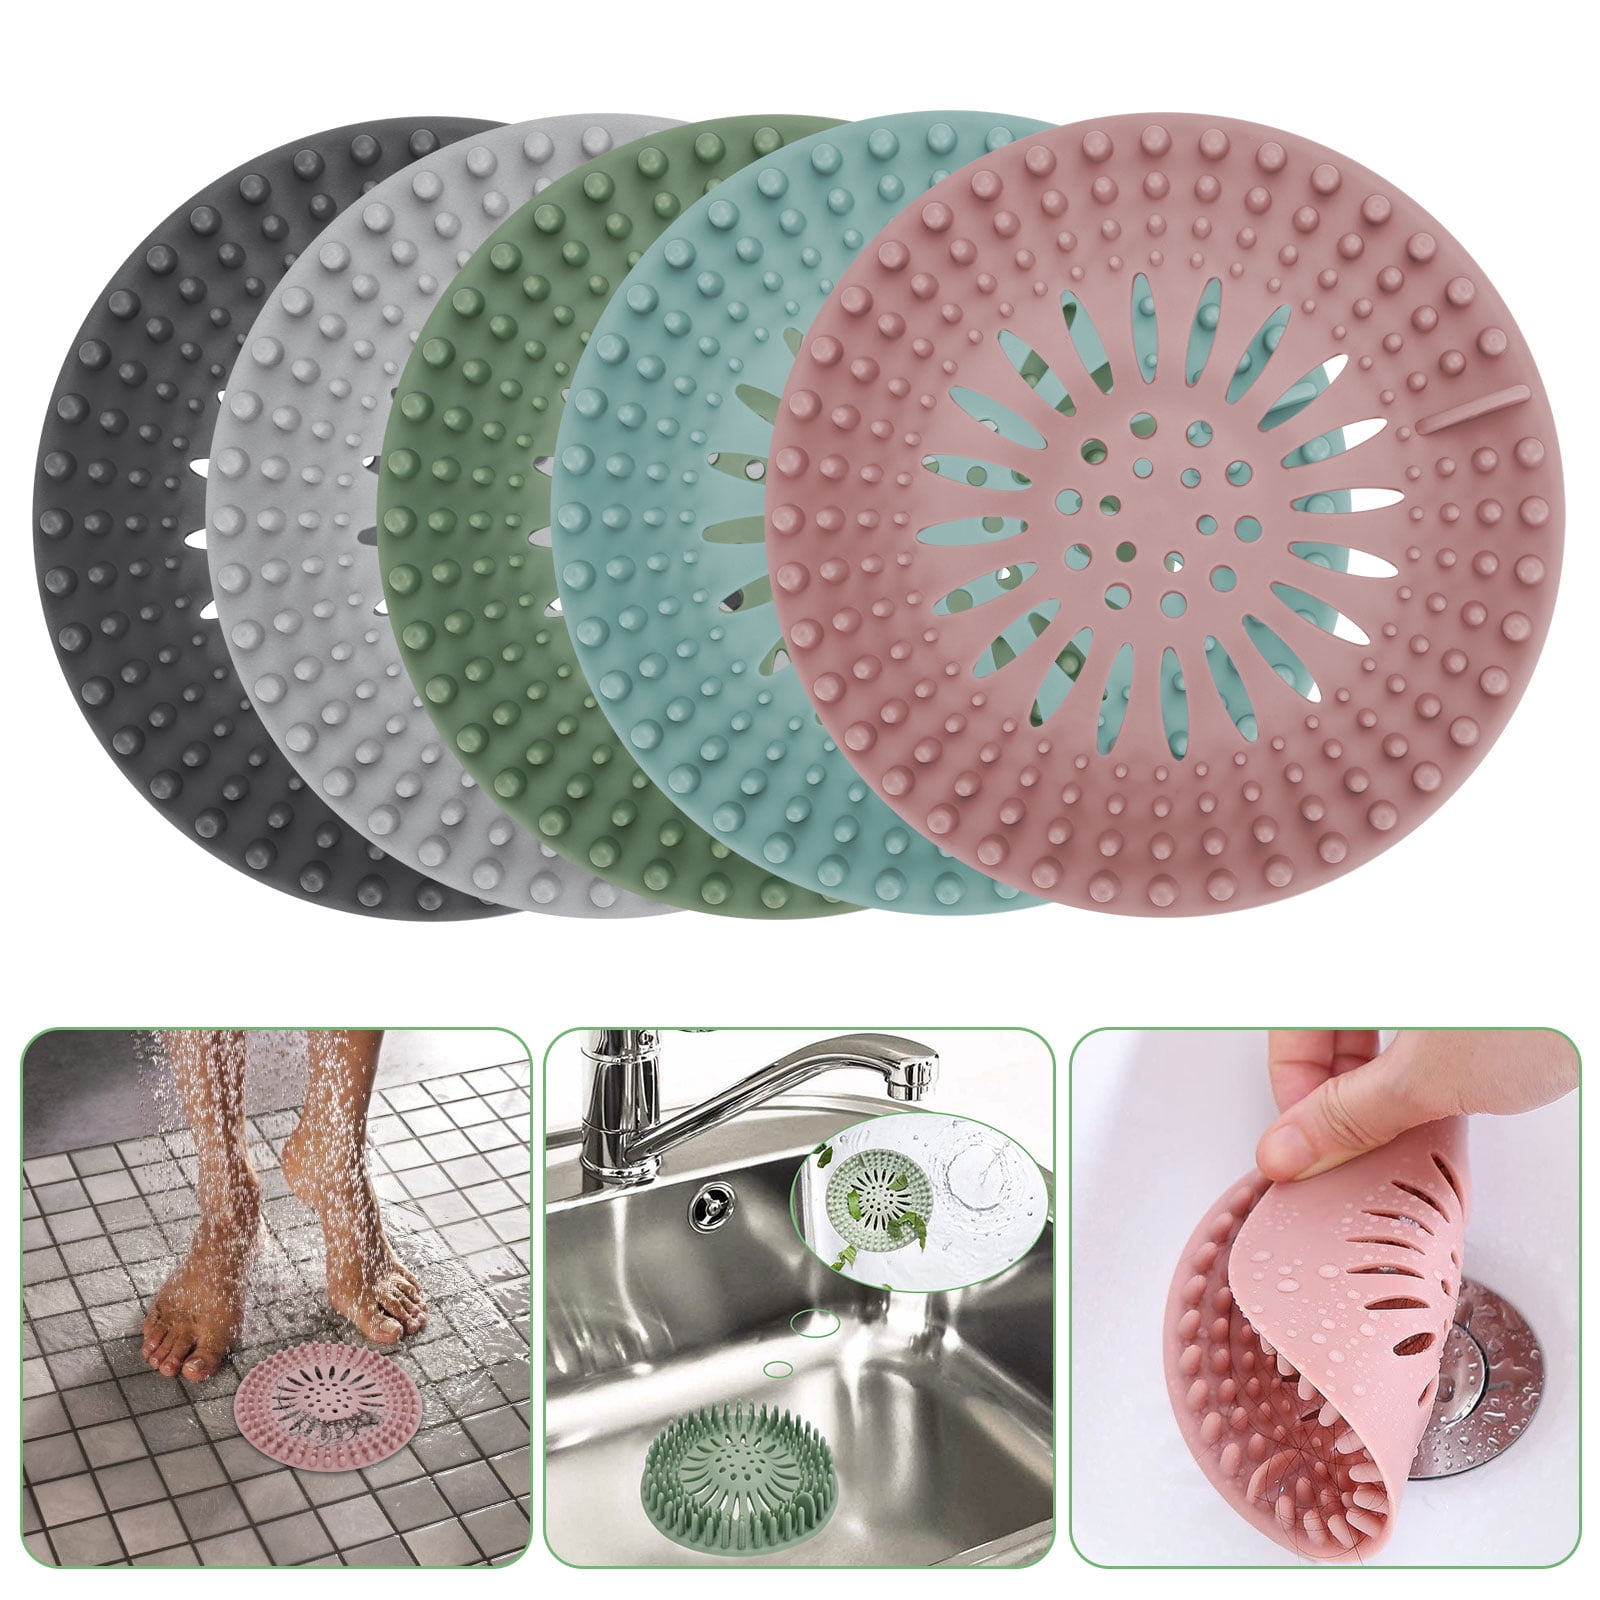 Patented Product XAJOON Drain Hair Catcher/Bathtub Shower Hair Drain Catcher /Suitable for Kitchen Bathroom Bathtub Upgraded, Gold Catch Hair Impurities and Quick Draining. Sink